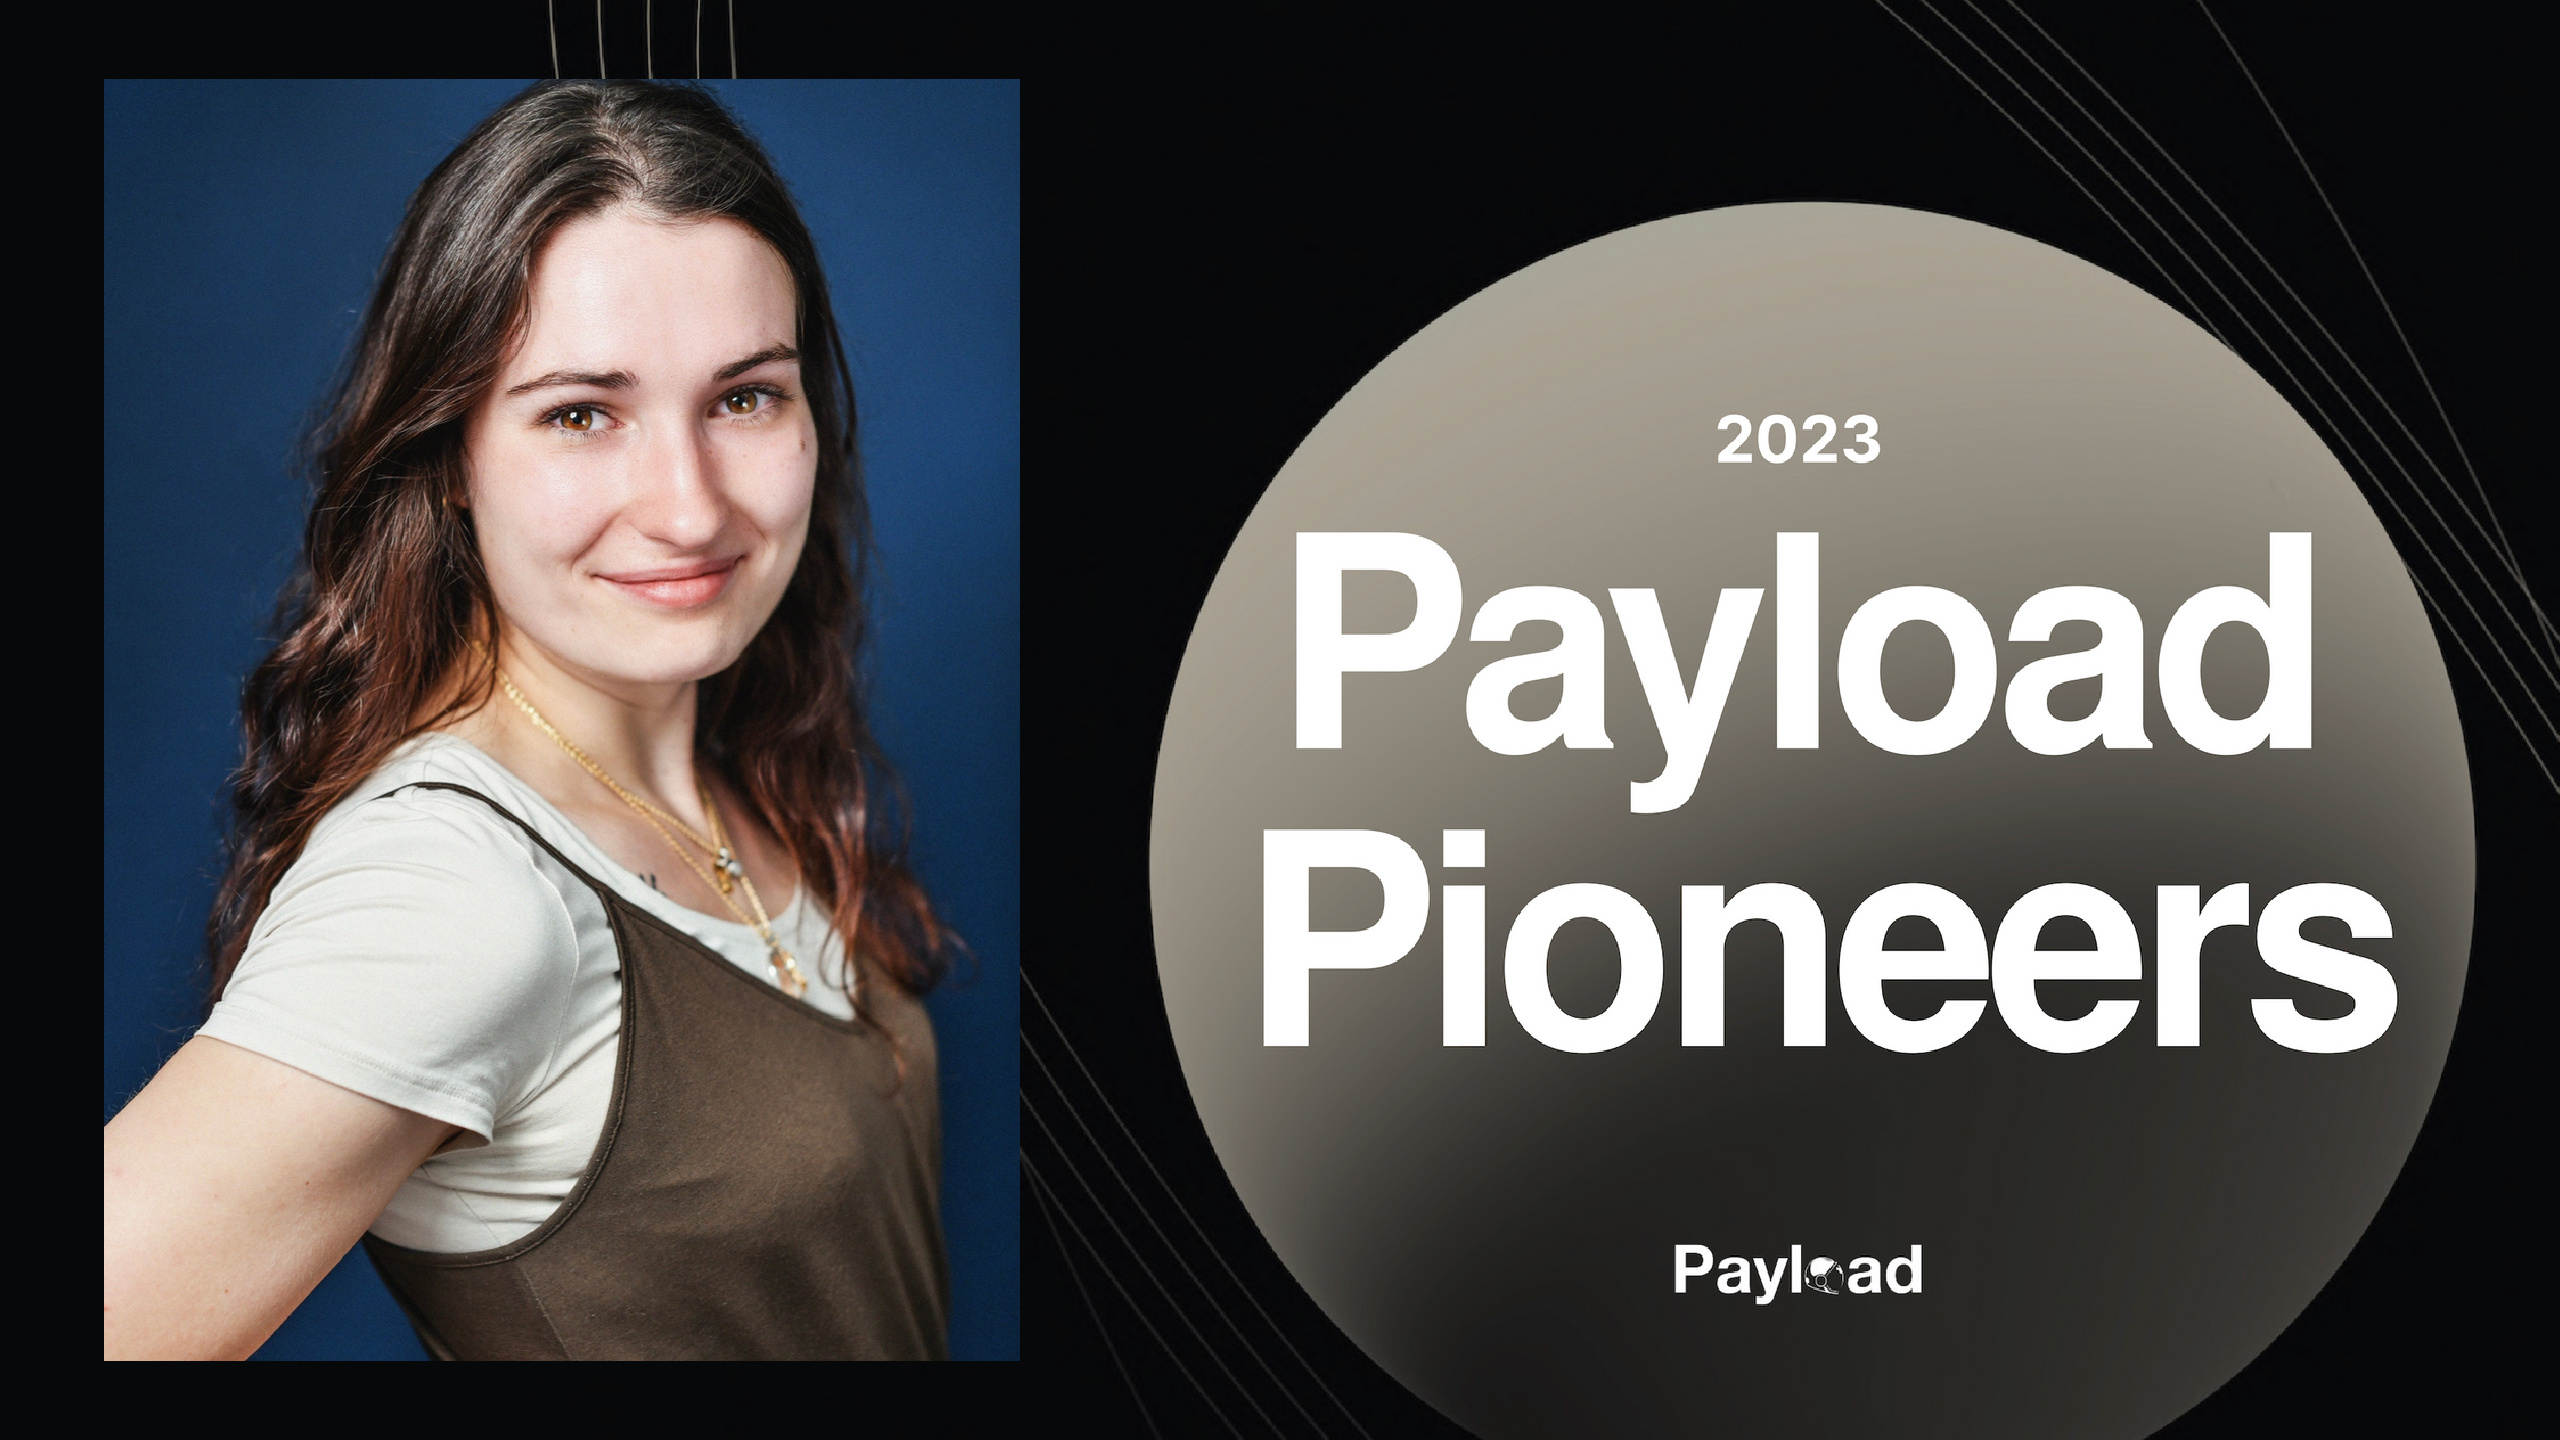 Payload Pioneers 2023: Léa Duthil